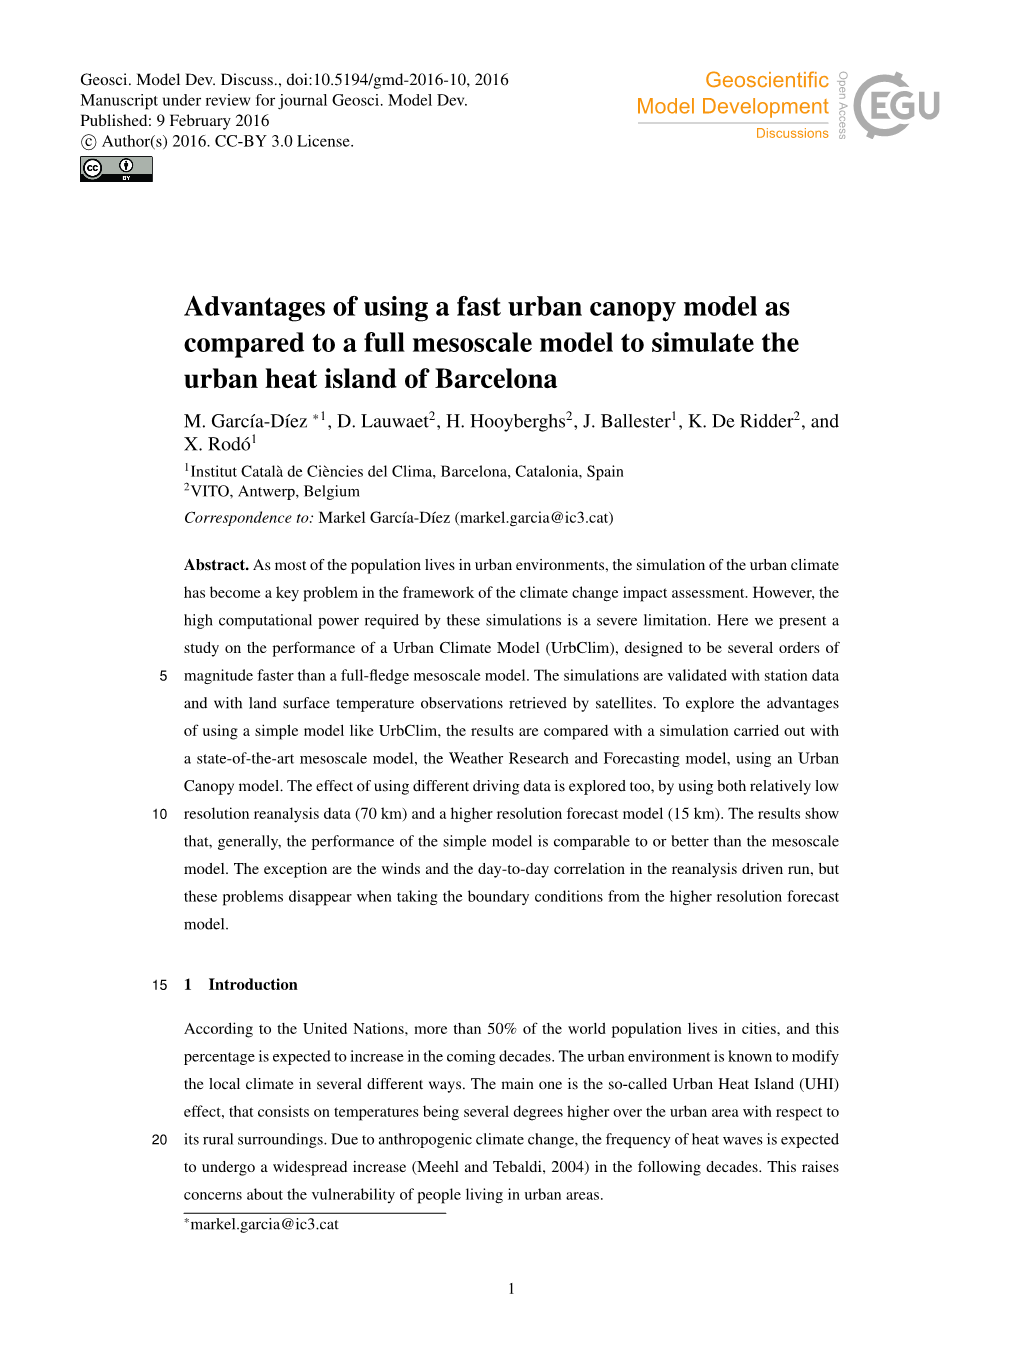 Advantages of Using a Fast Urban Canopy Model As Compared to a Full Mesoscale Model to Simulate the Urban Heat Island of Barcelona M